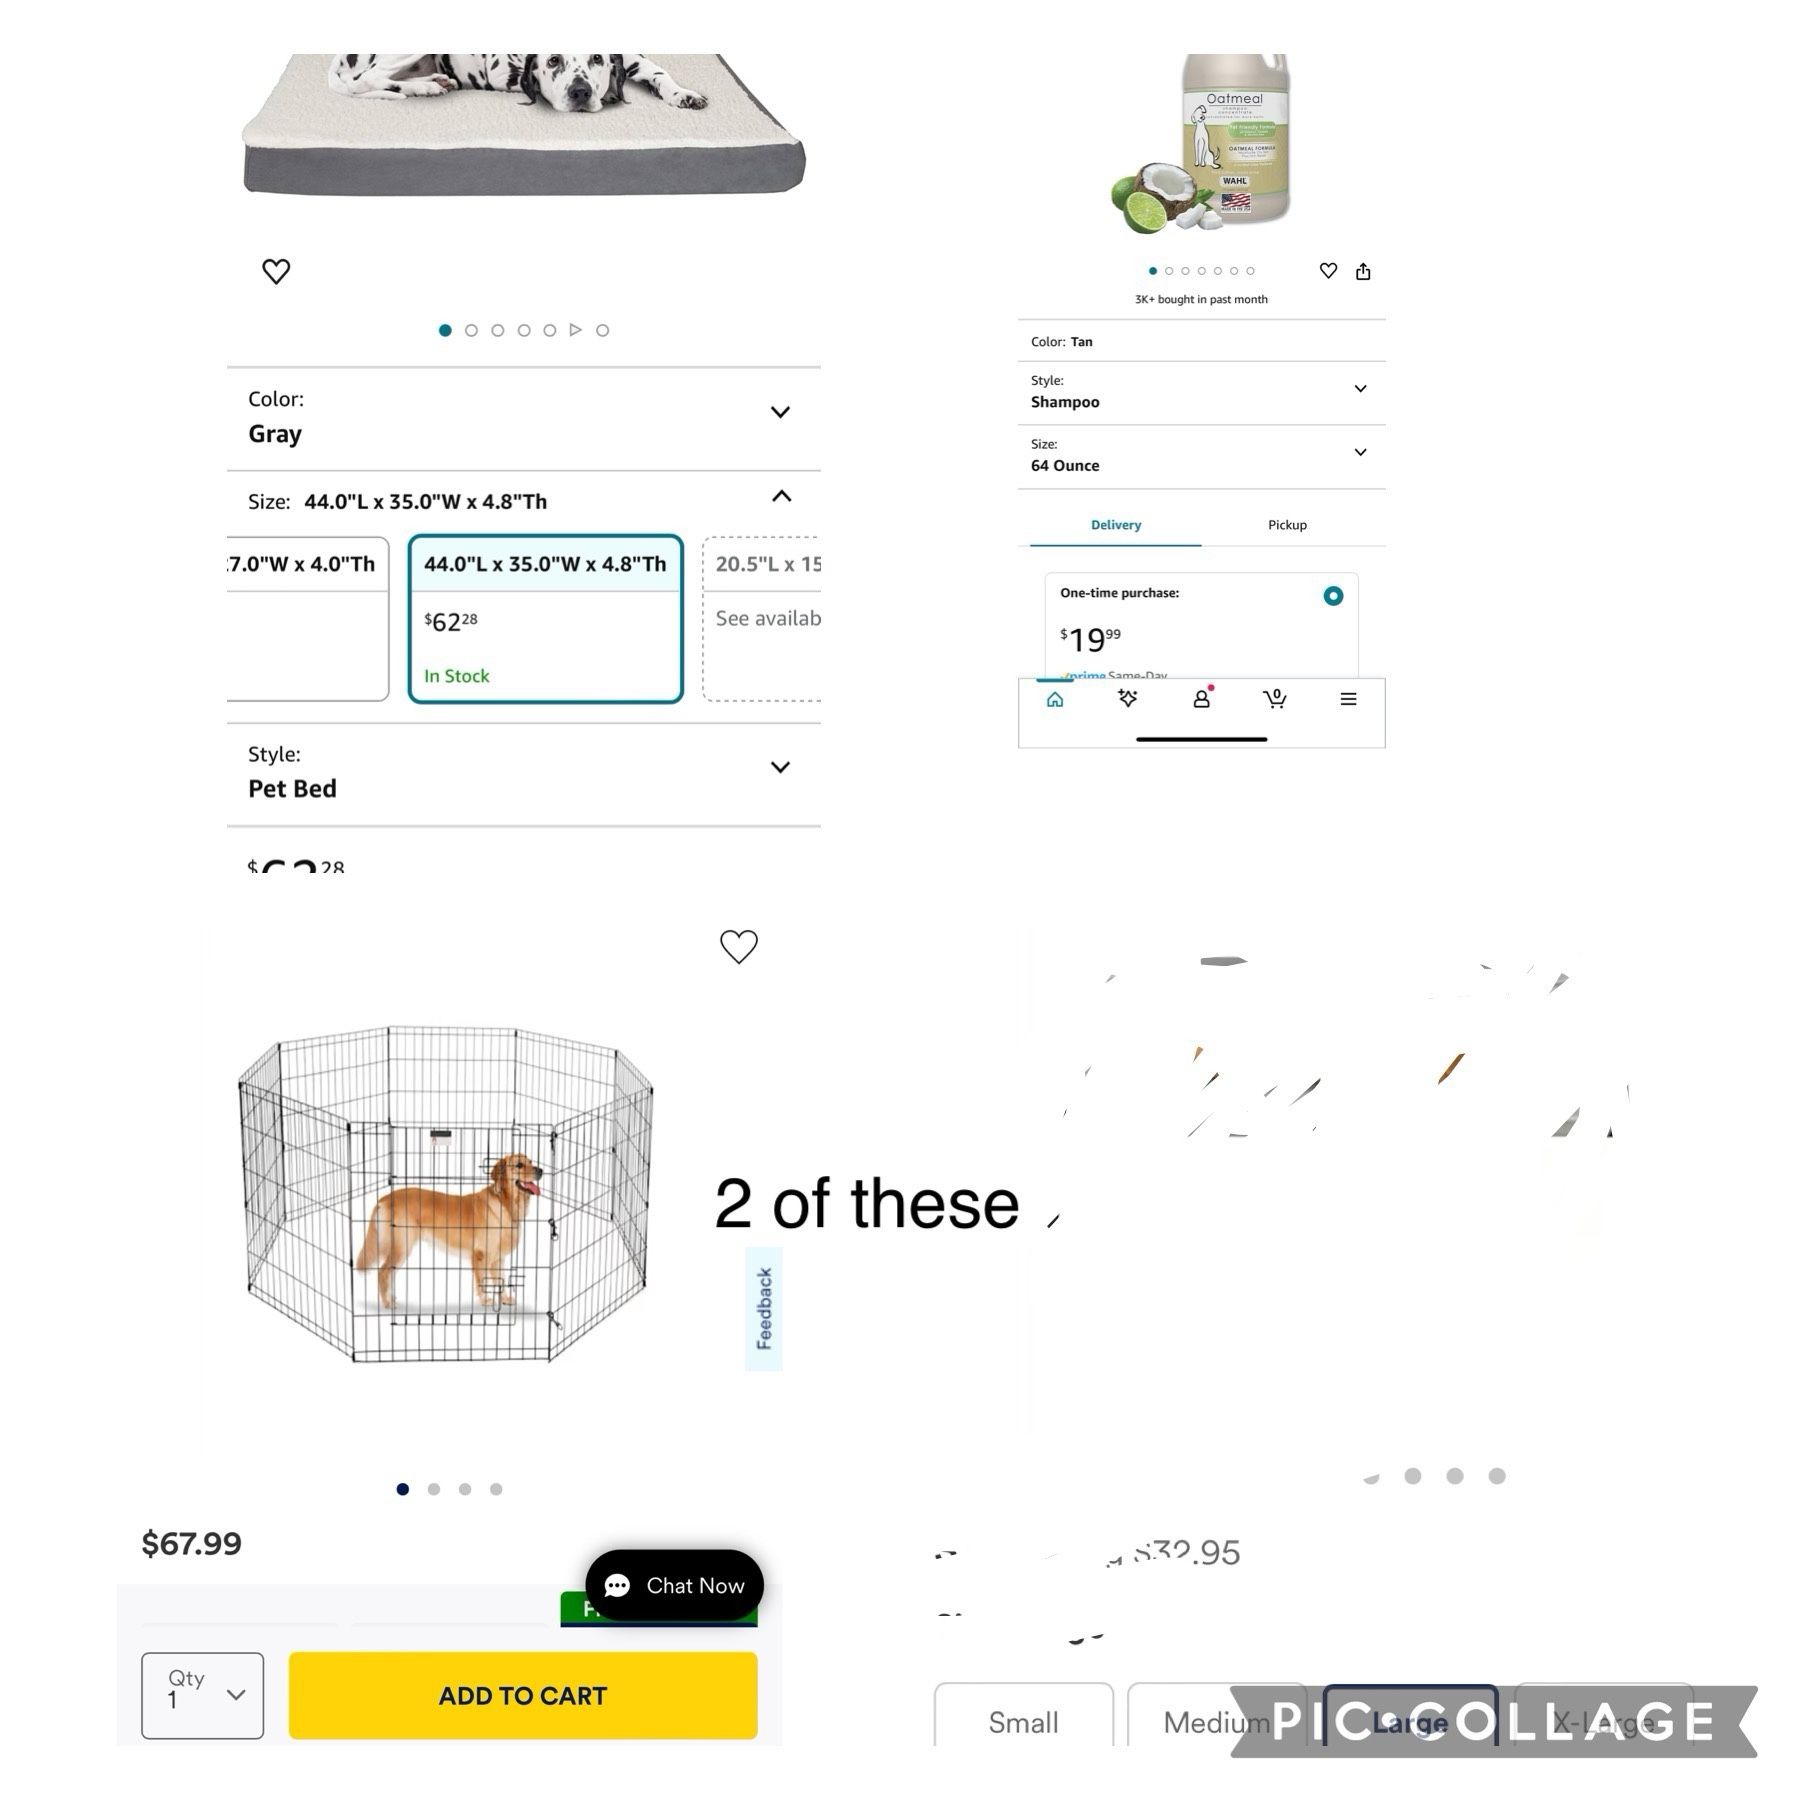 Dog Supplies Bundle - Beds And More